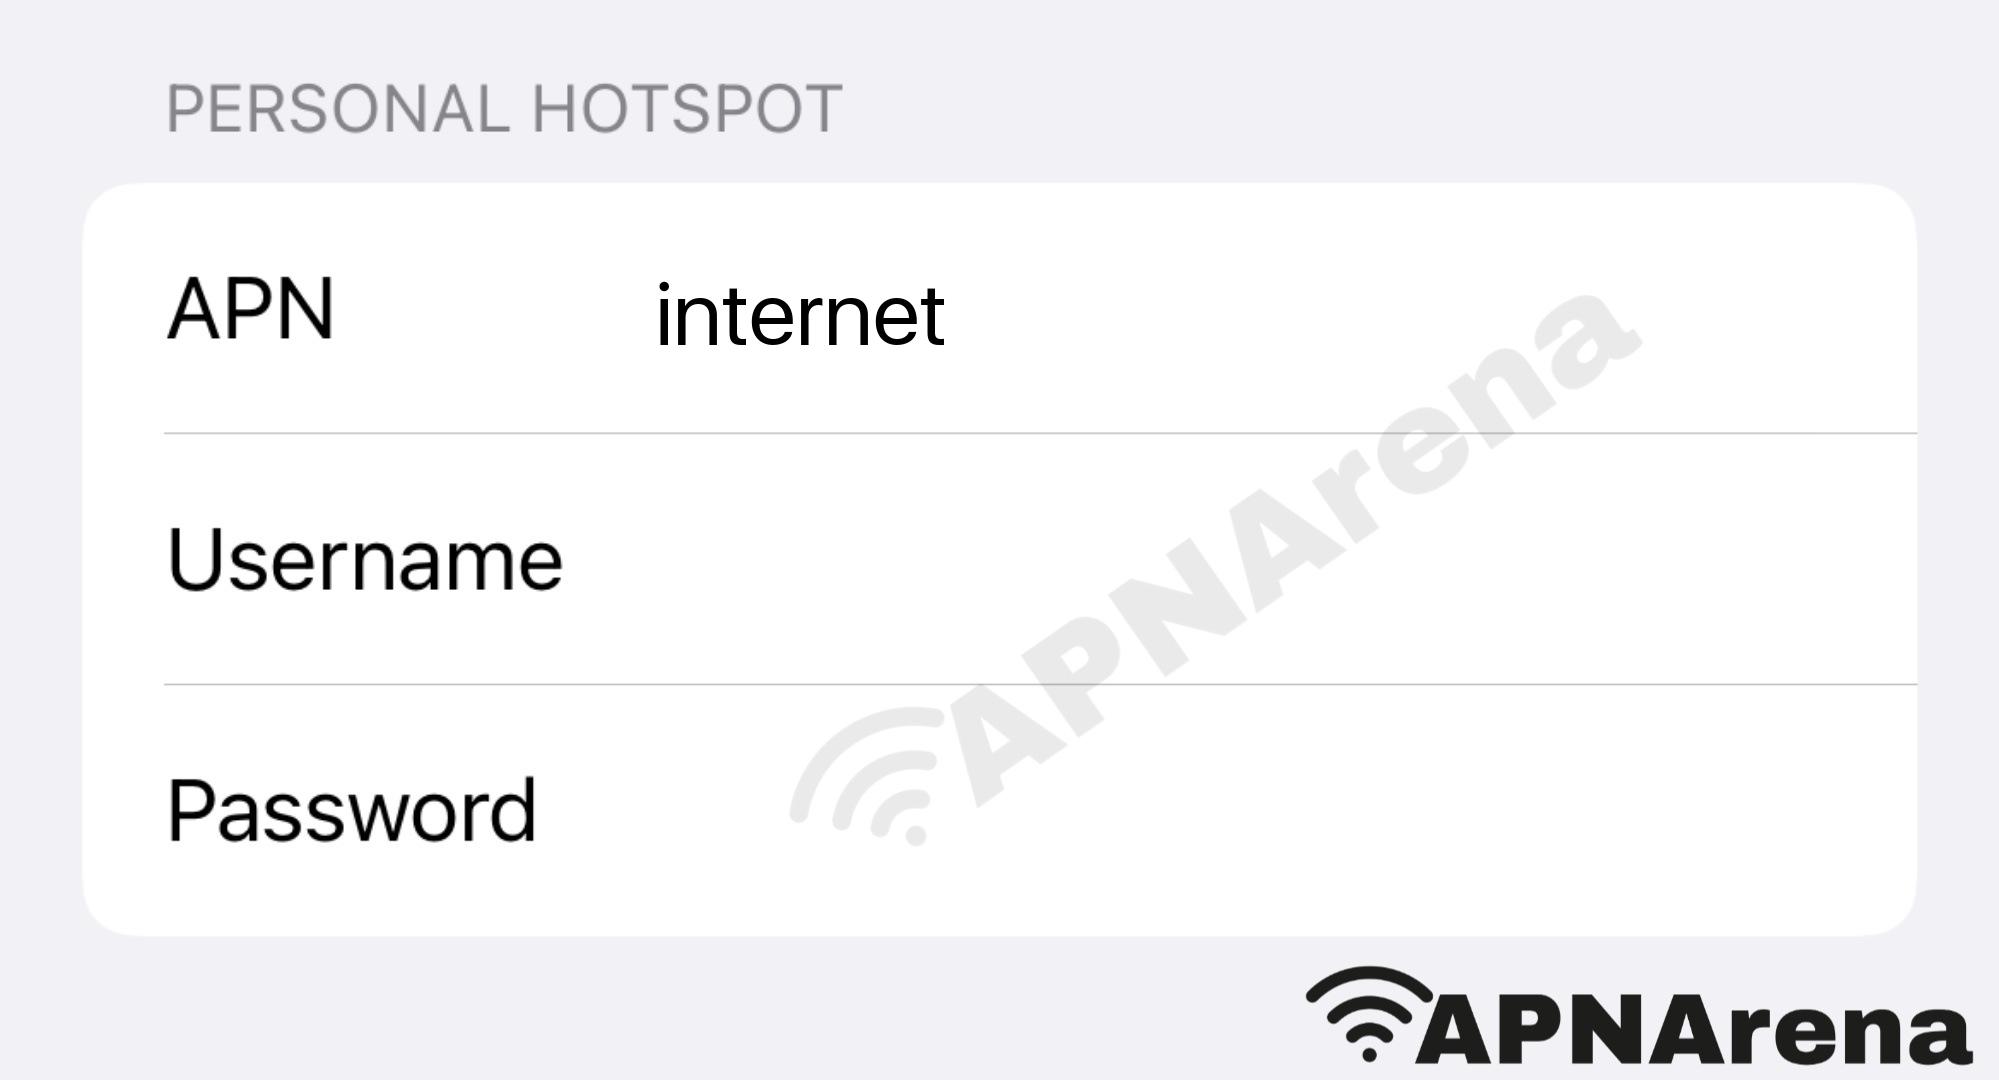 Republic Wireless Personal Hotspot Settings for iPhone